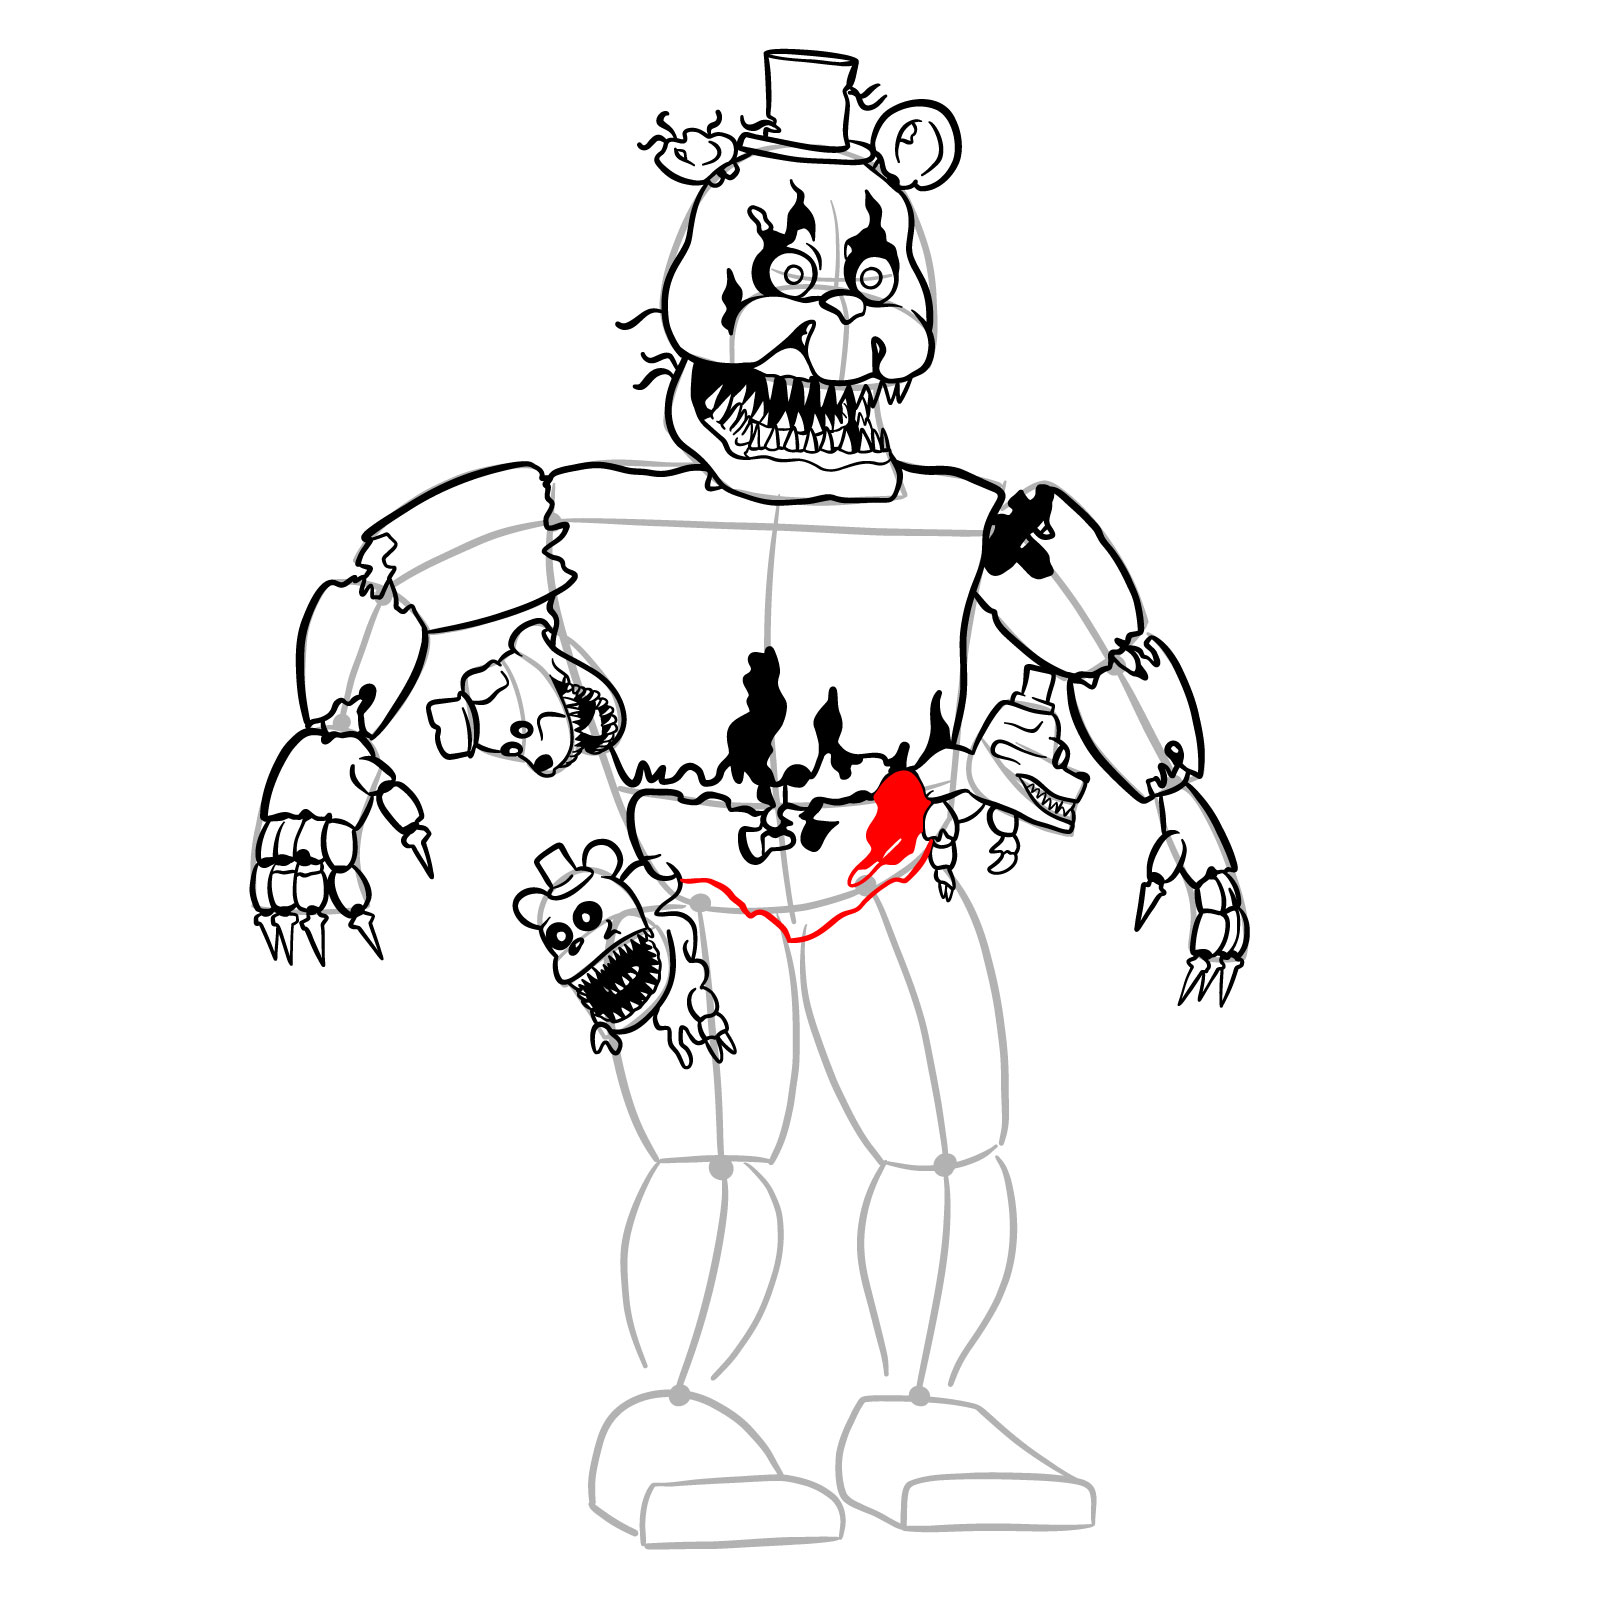 How to draw Nightmare Freddy - step 39